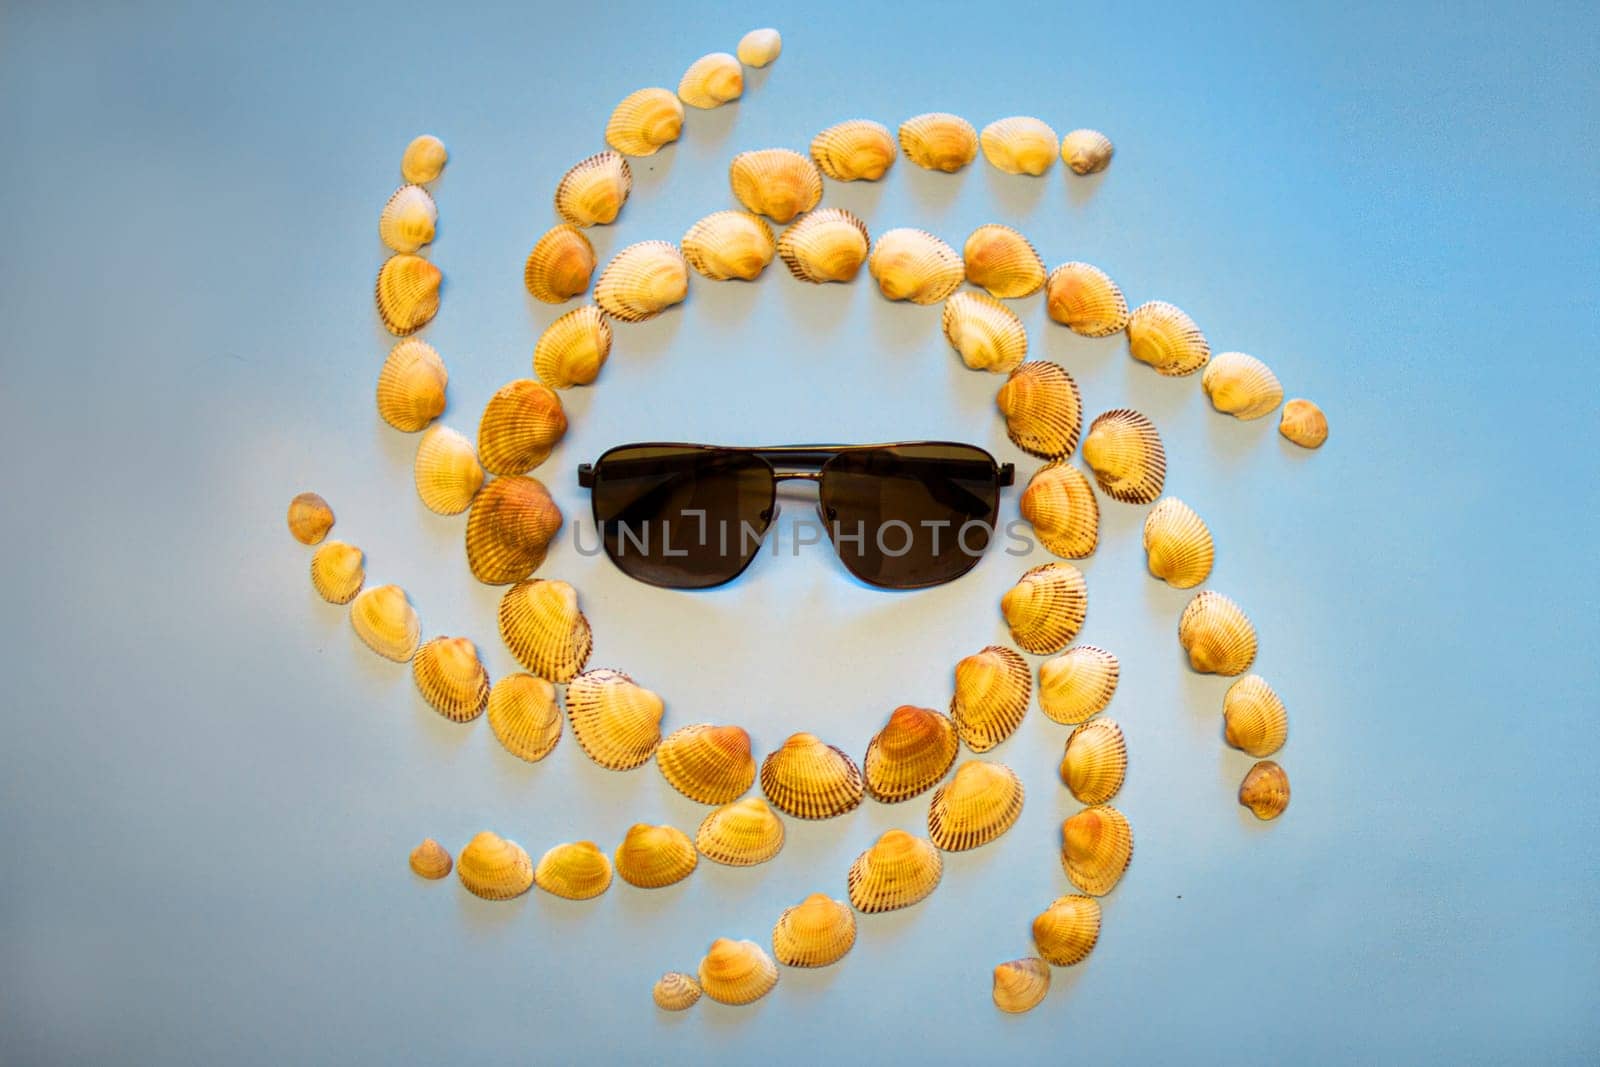 Sun of shells in sunglasses. High quality photo